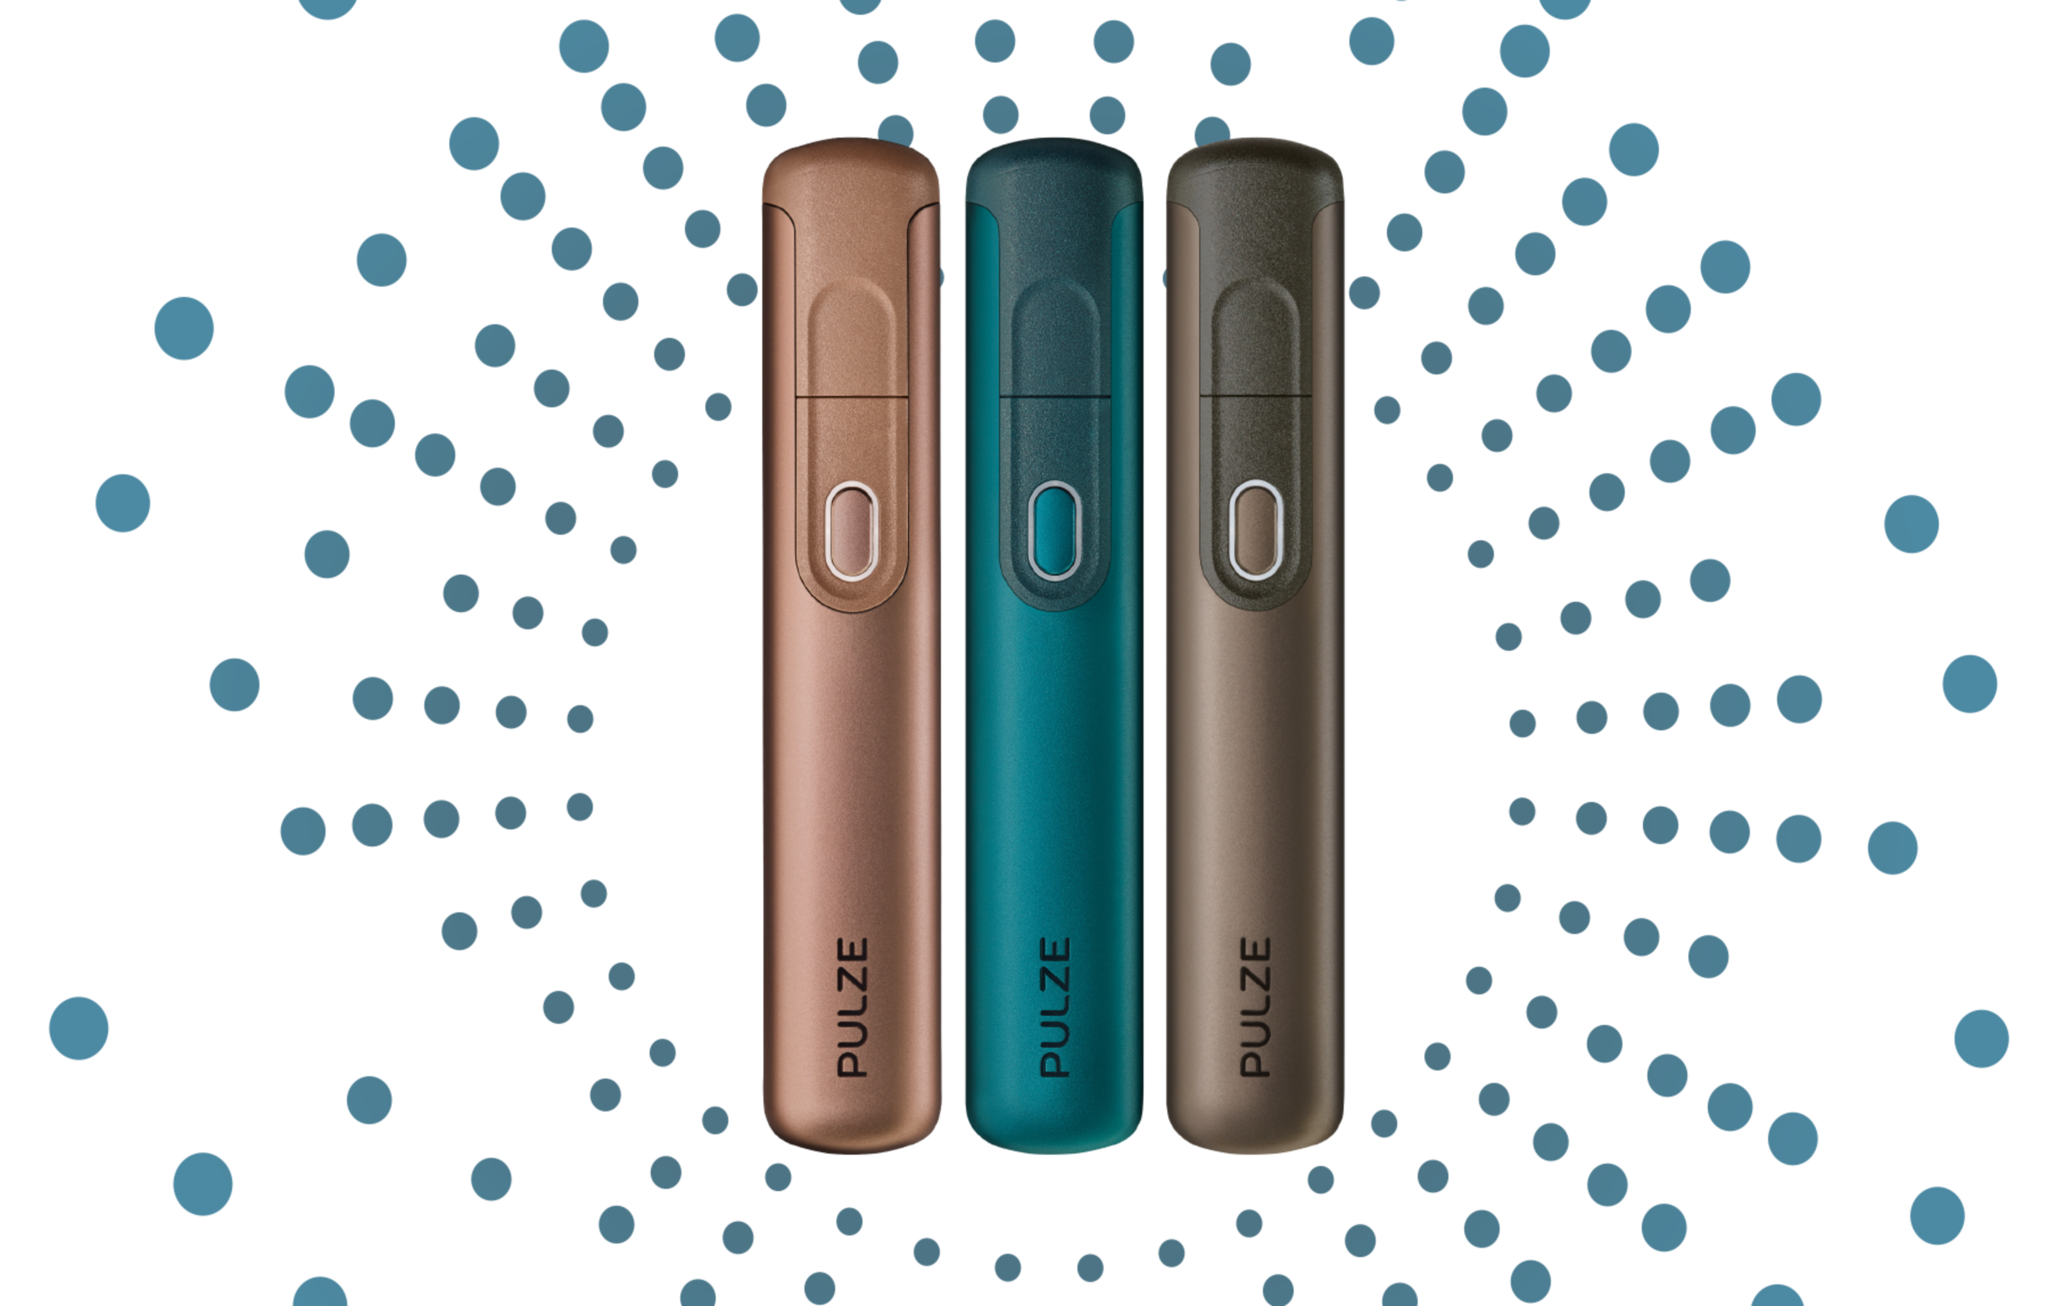 Pulze devices in 3 different colours